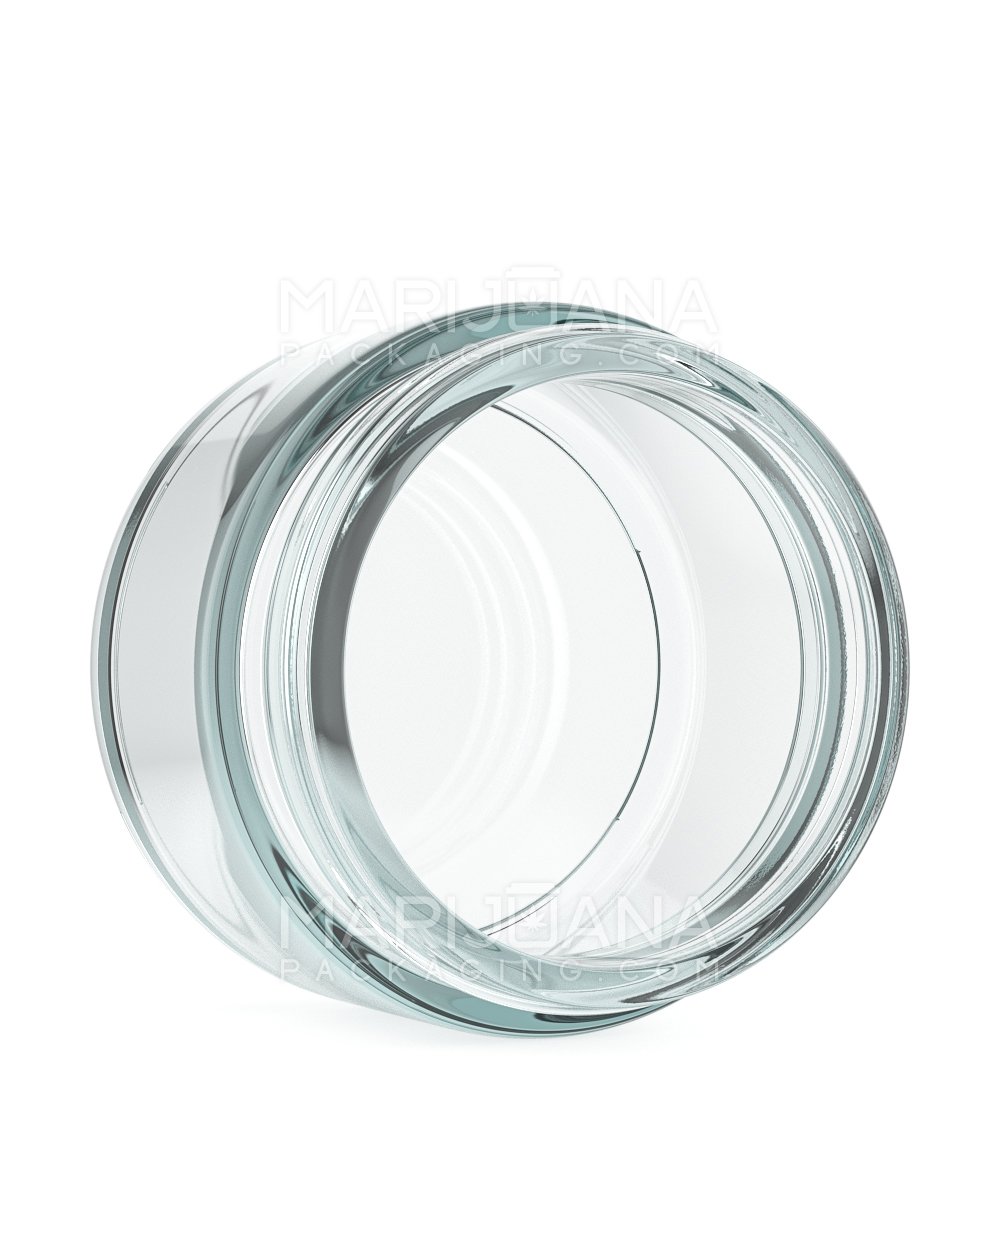 Straight Sided Clear Glass Jars | 63mm - 3.4oz - 96 Count - 3